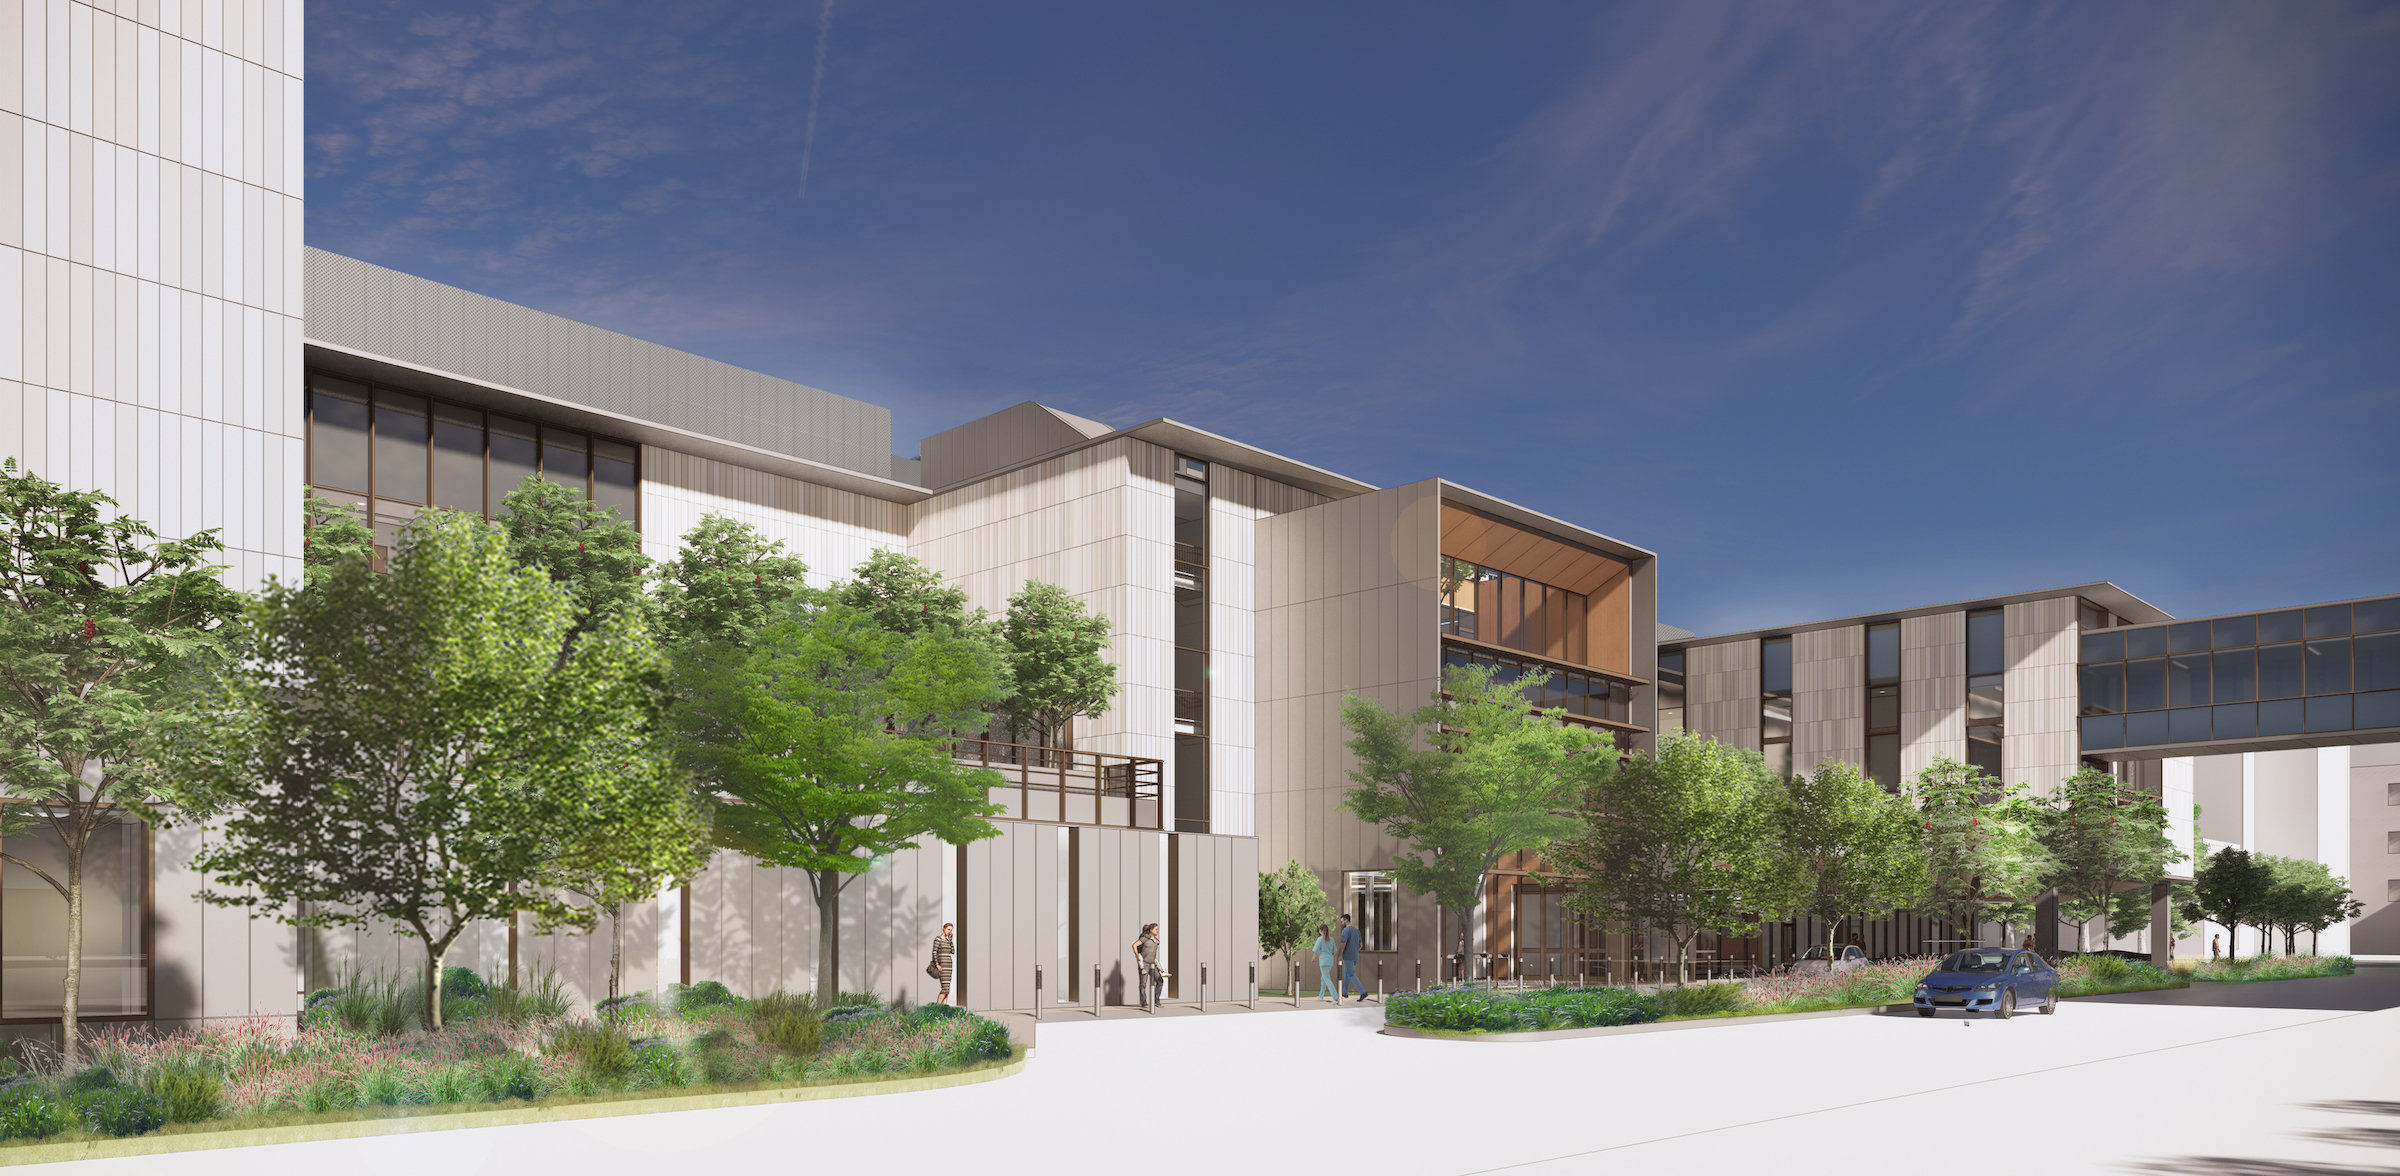 Santa Clara Valley Medical Center breaks ground on a behavioral health facility for both adults and children. Rendering courtesy HGA